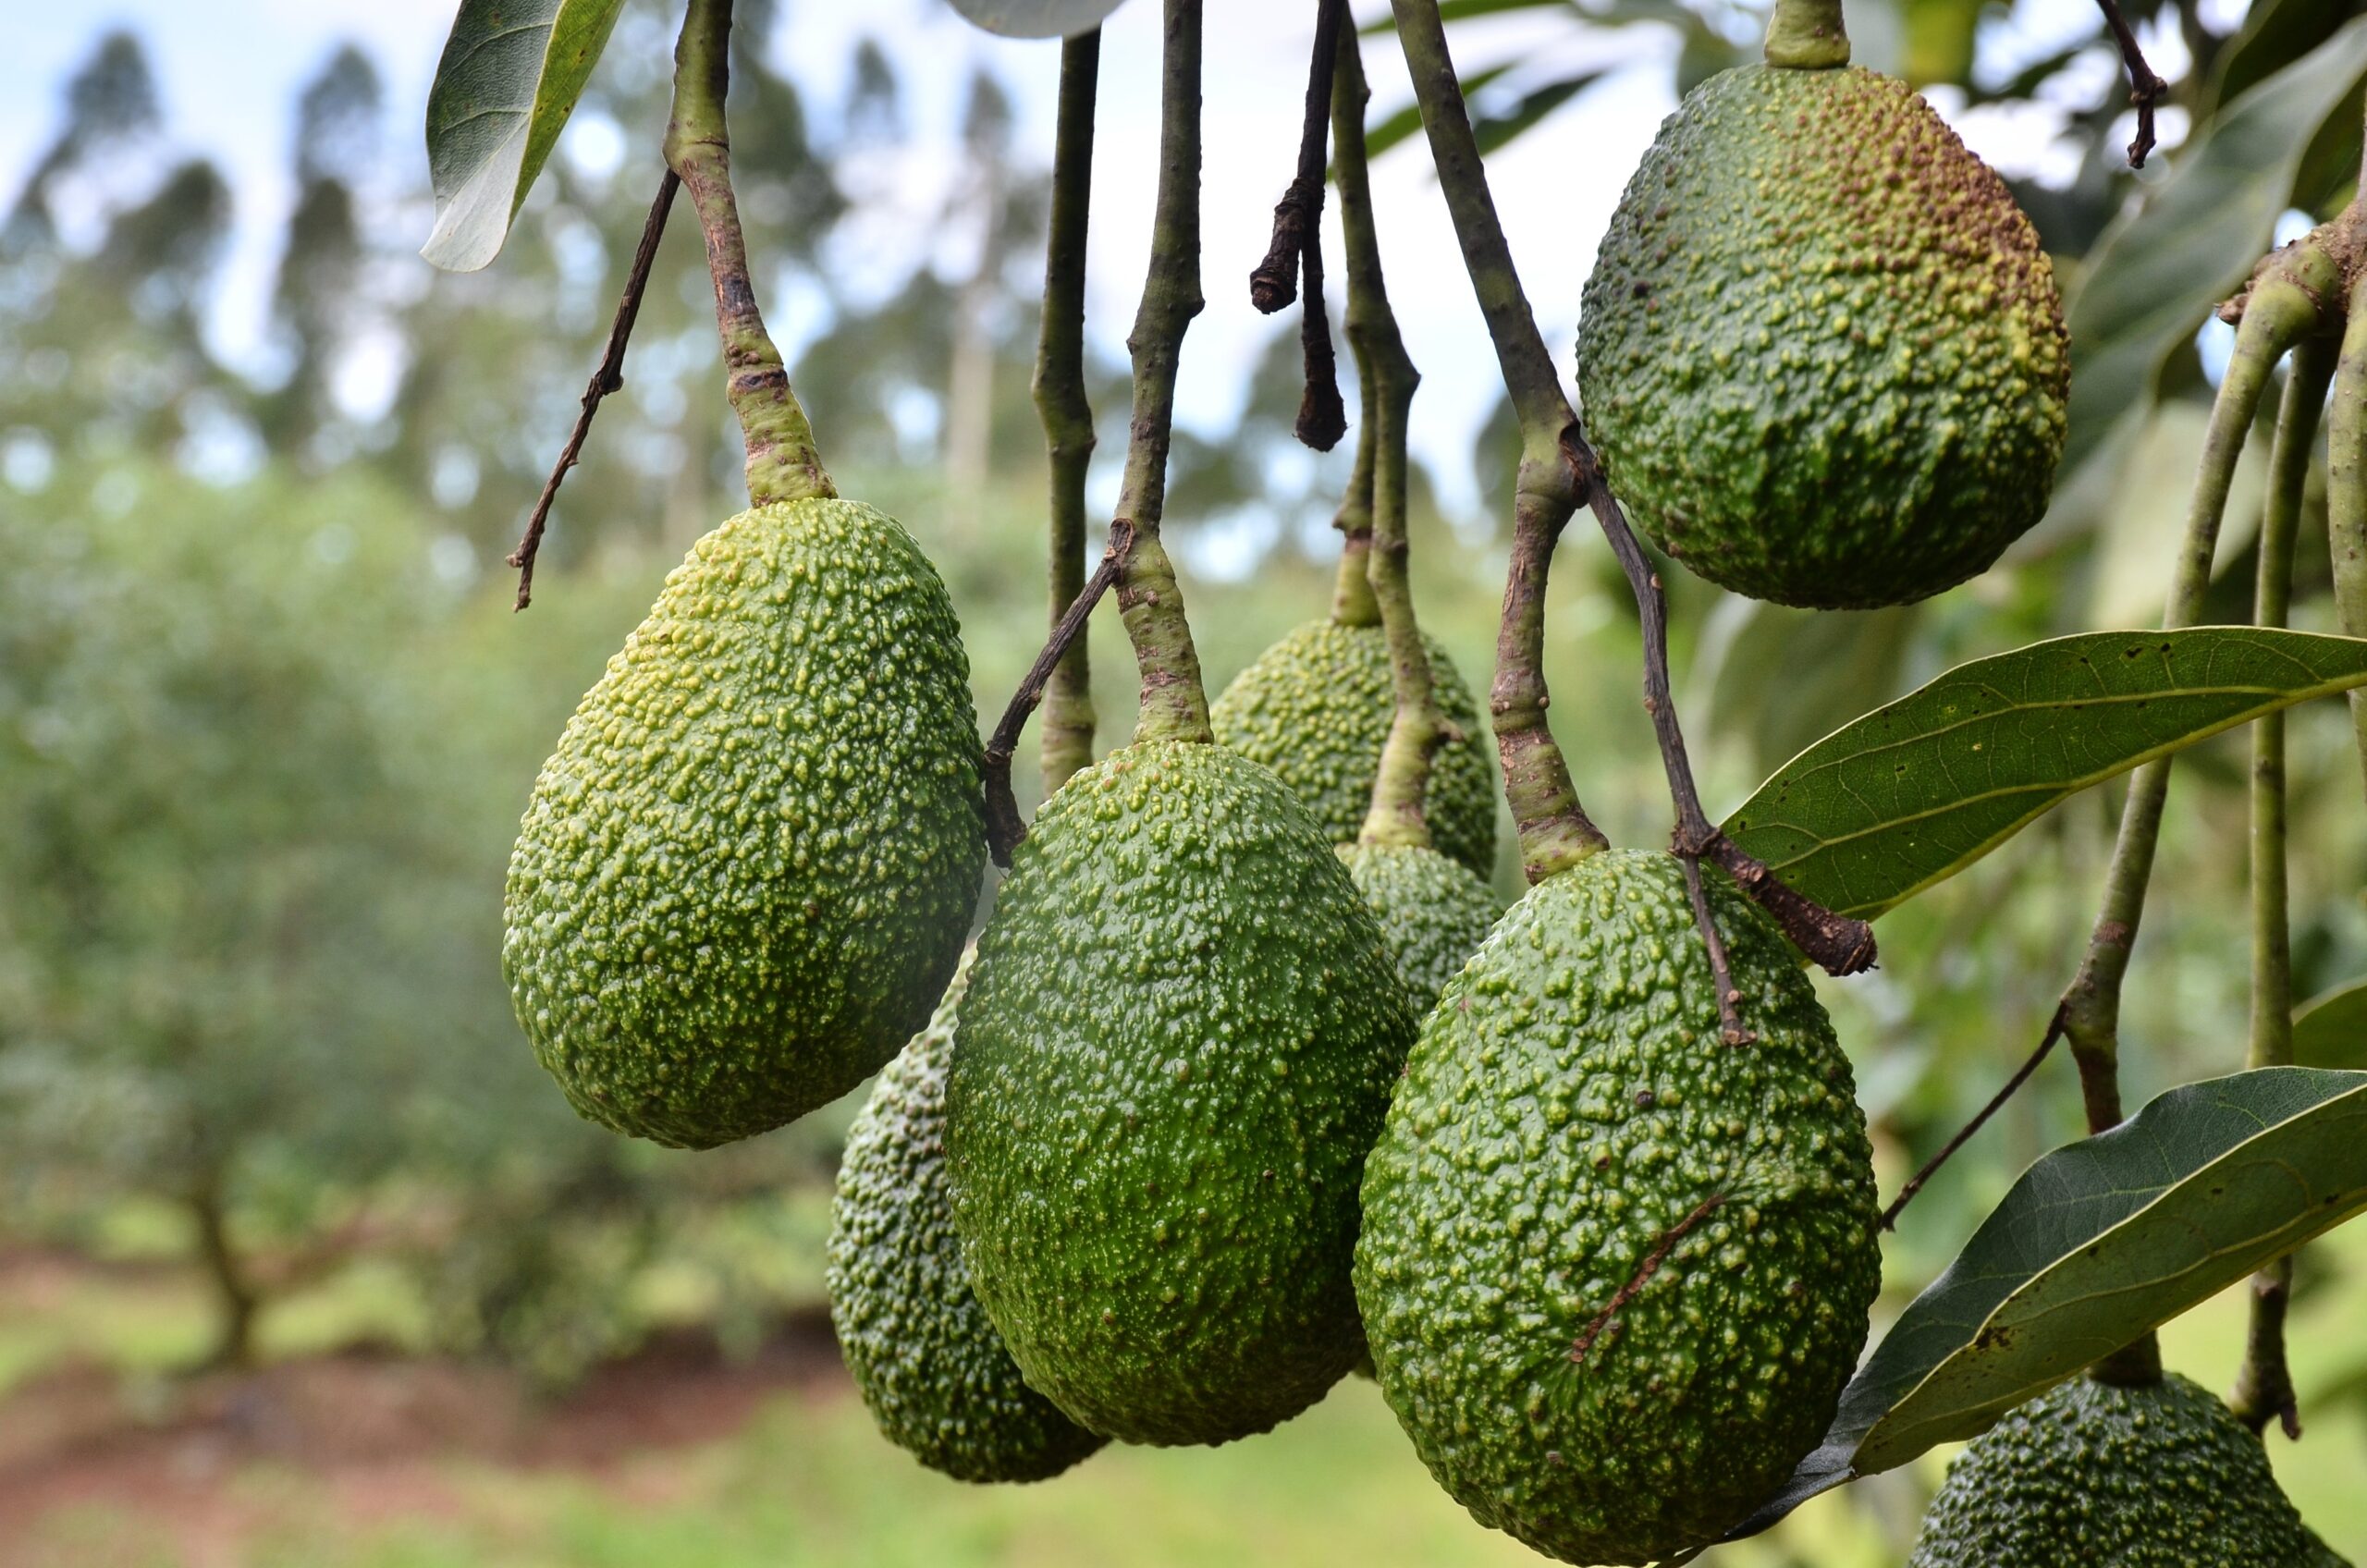 Enhancing Food Security and Livelihoods through Commercialization of Hass Avocado